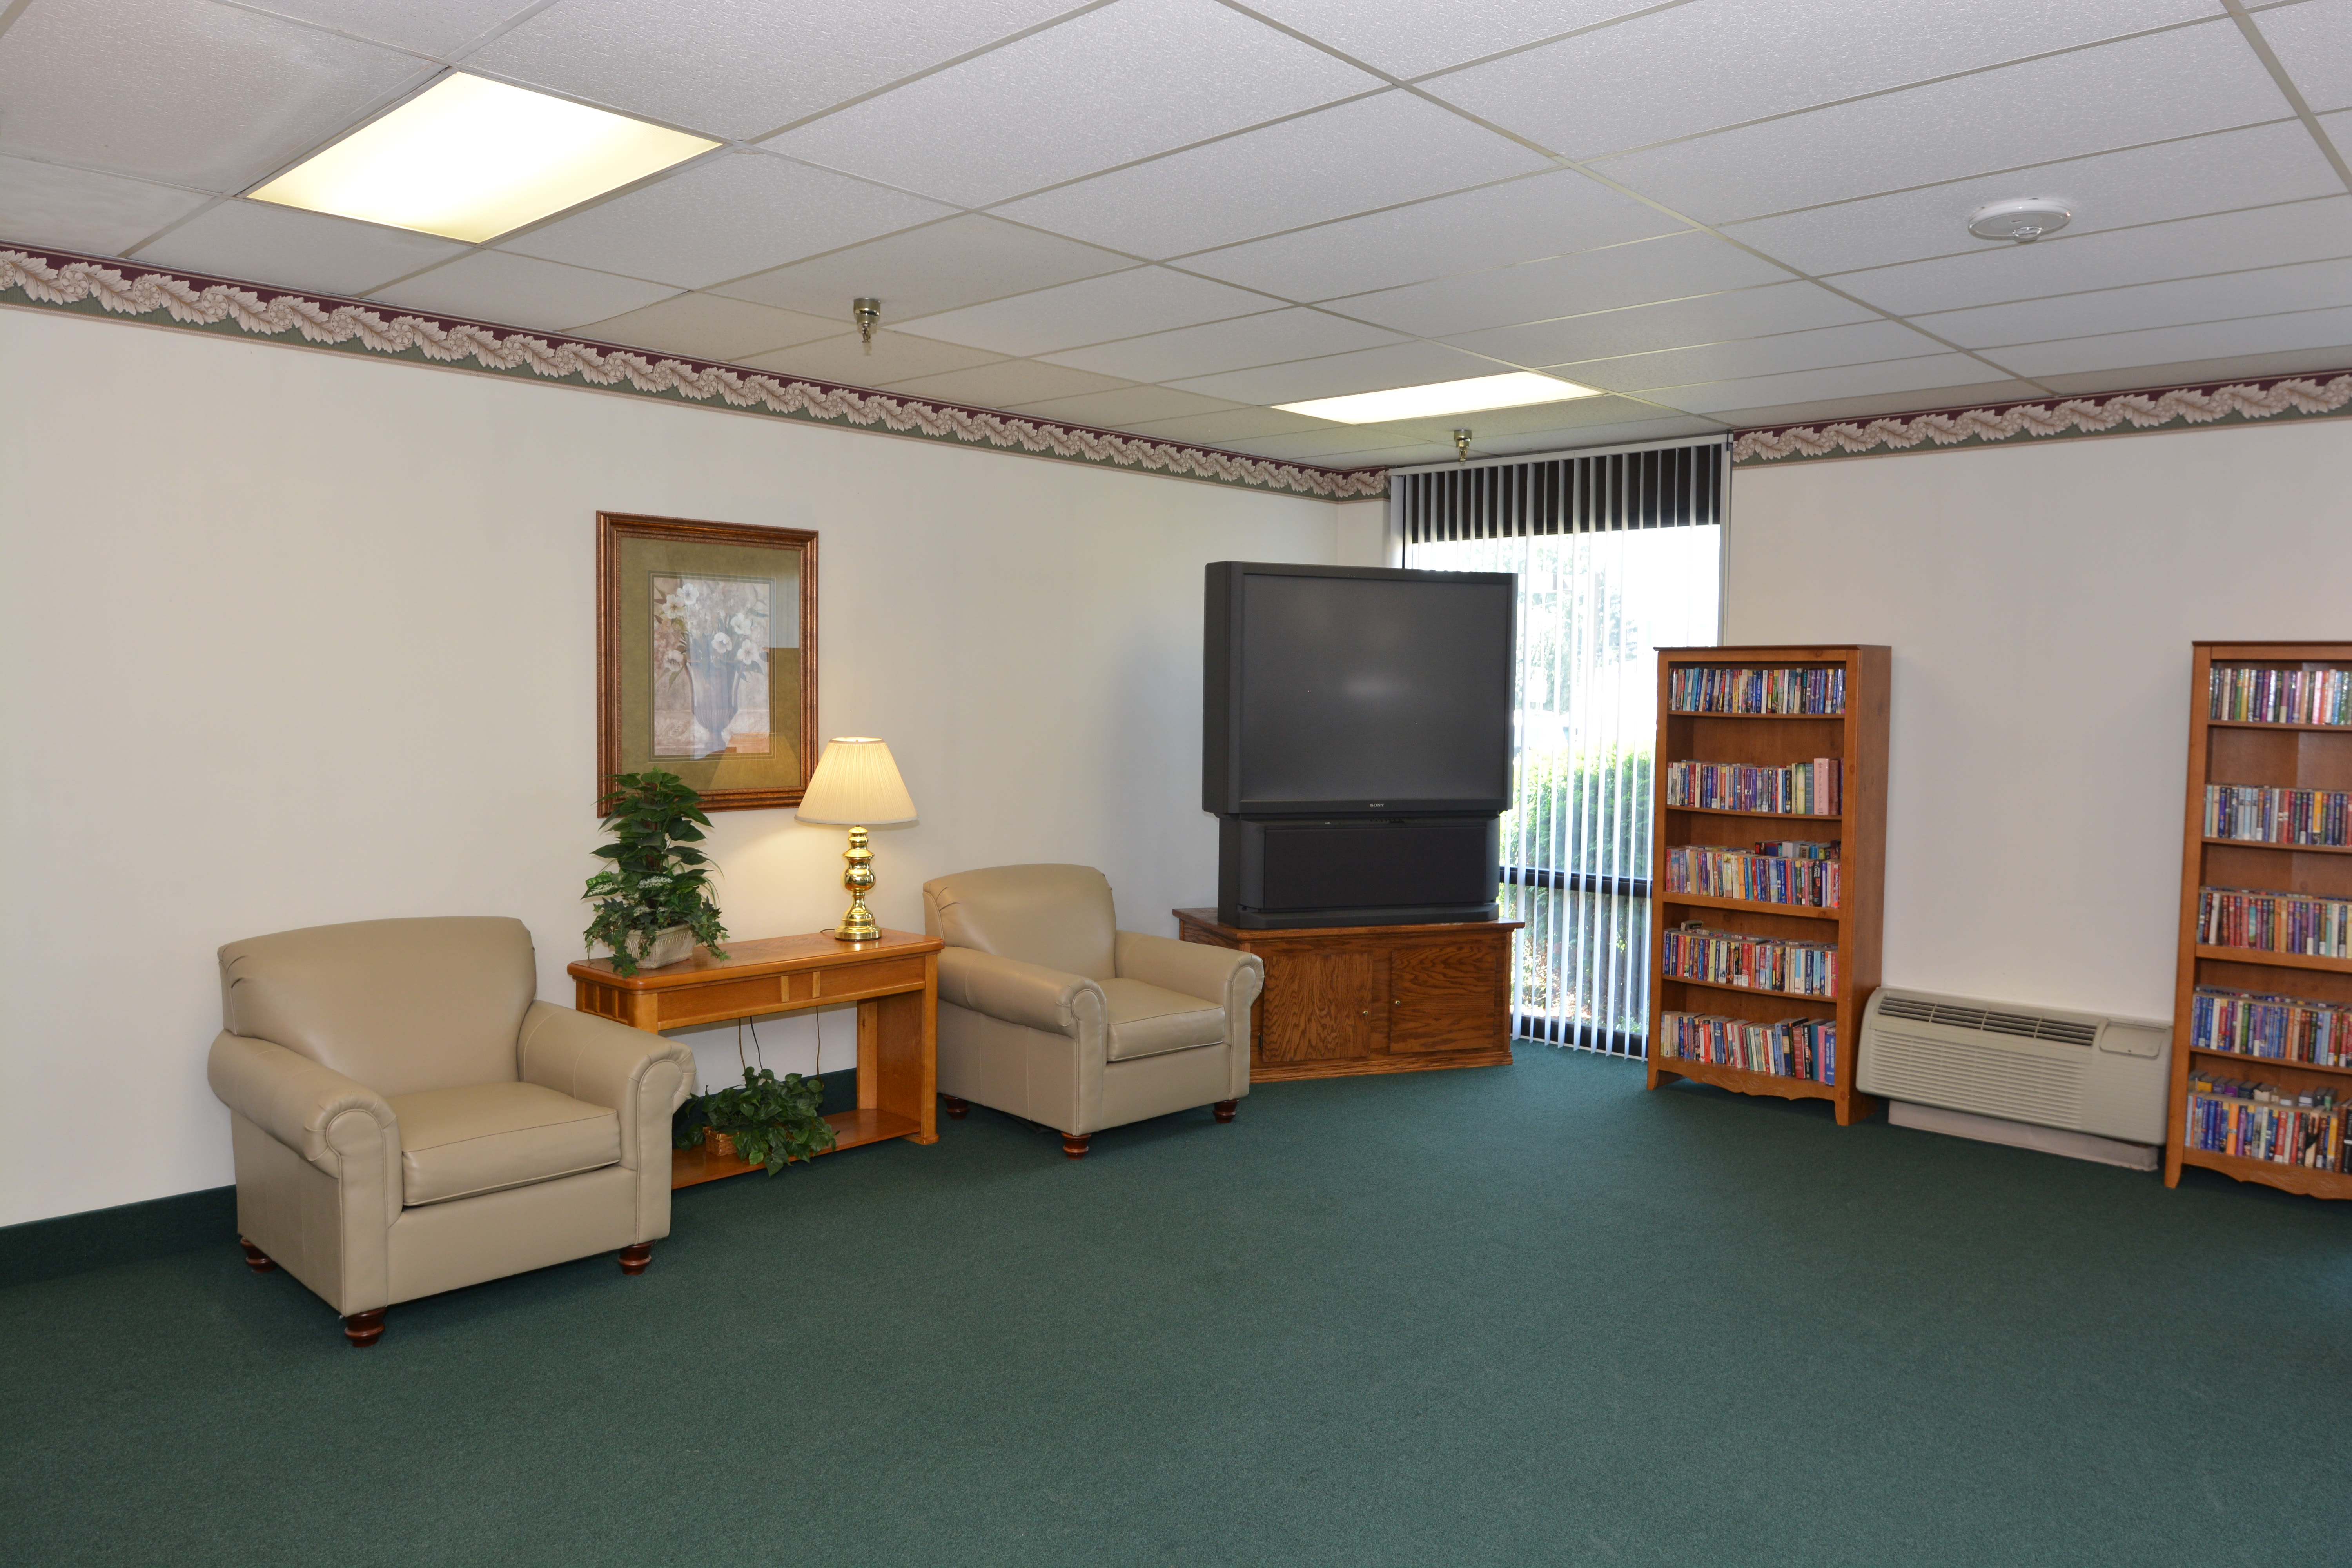 Buckeye Towers offers a wide variety of amenities in New Boston, Ohio